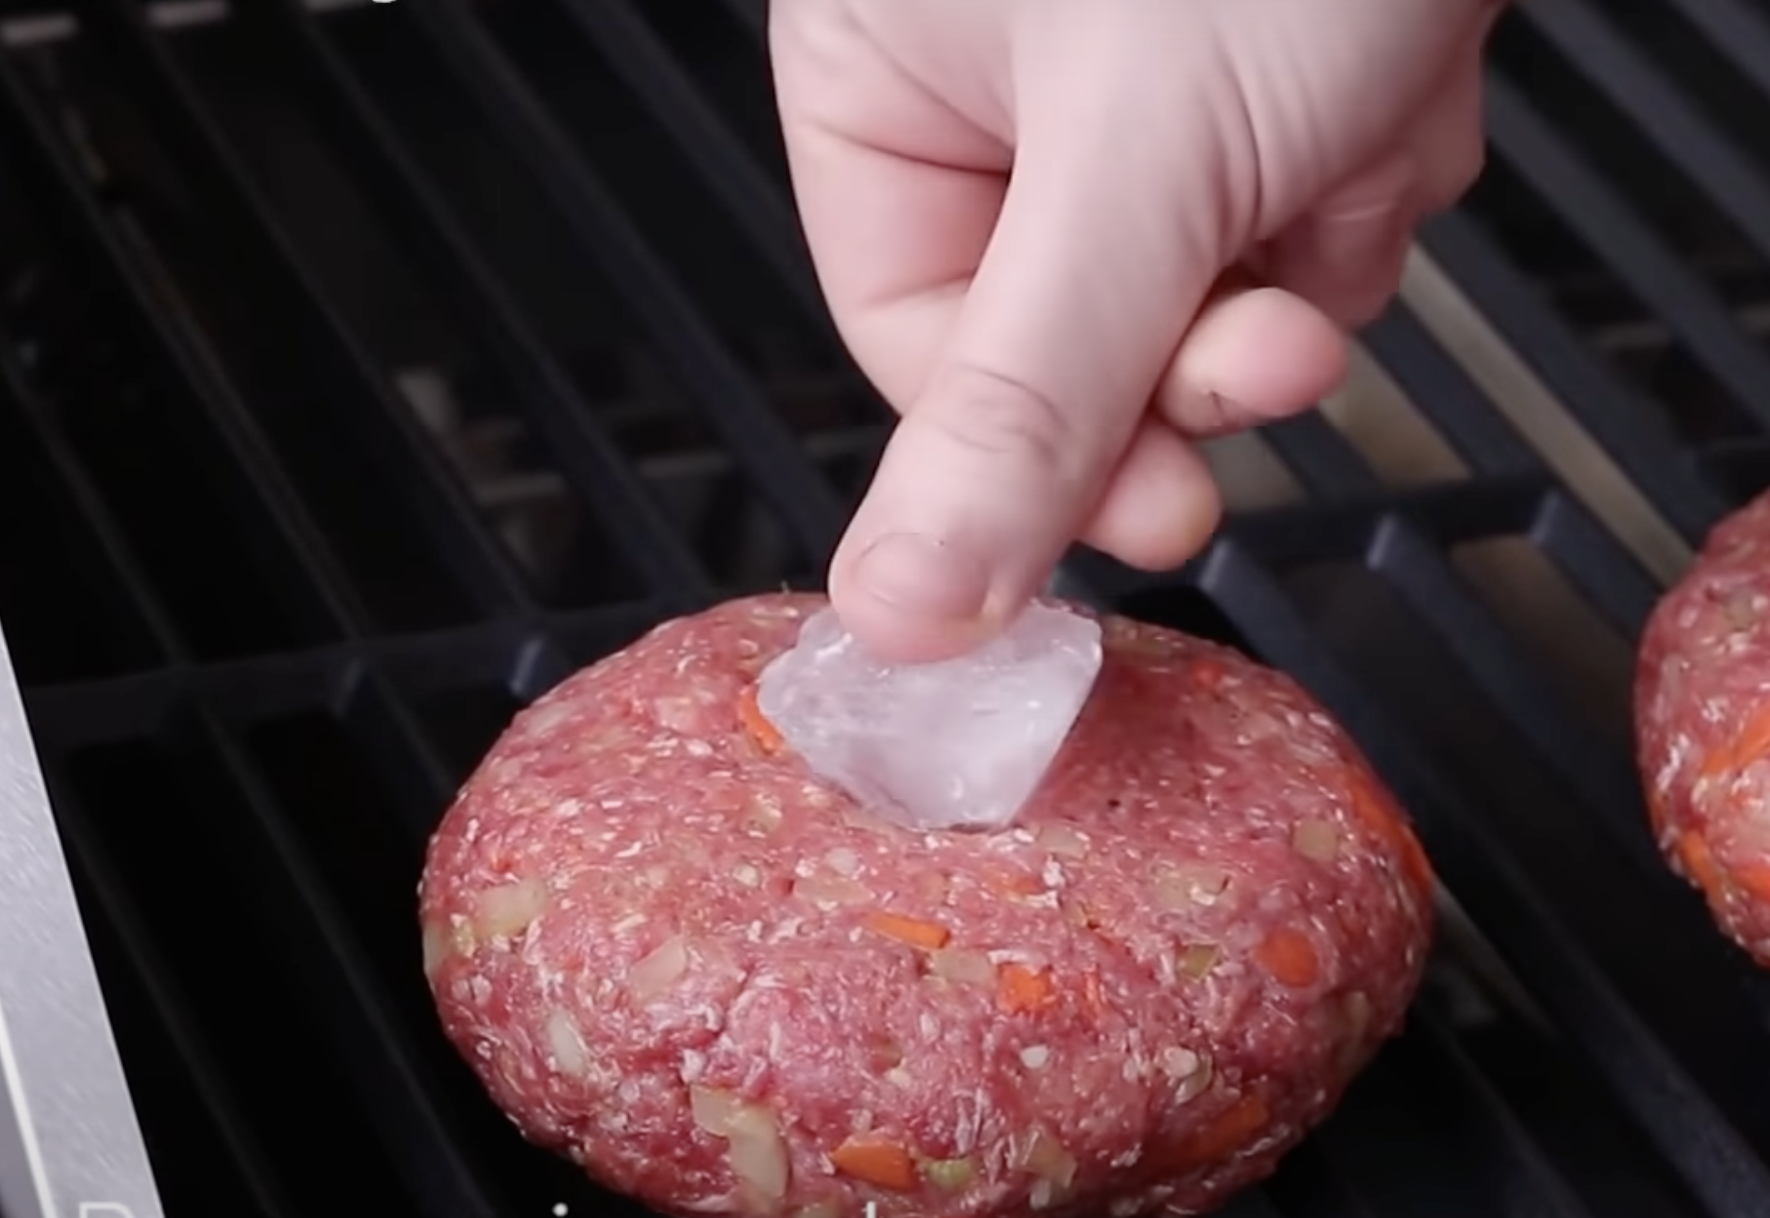 A hand pressing an ice cube into a burger patty.